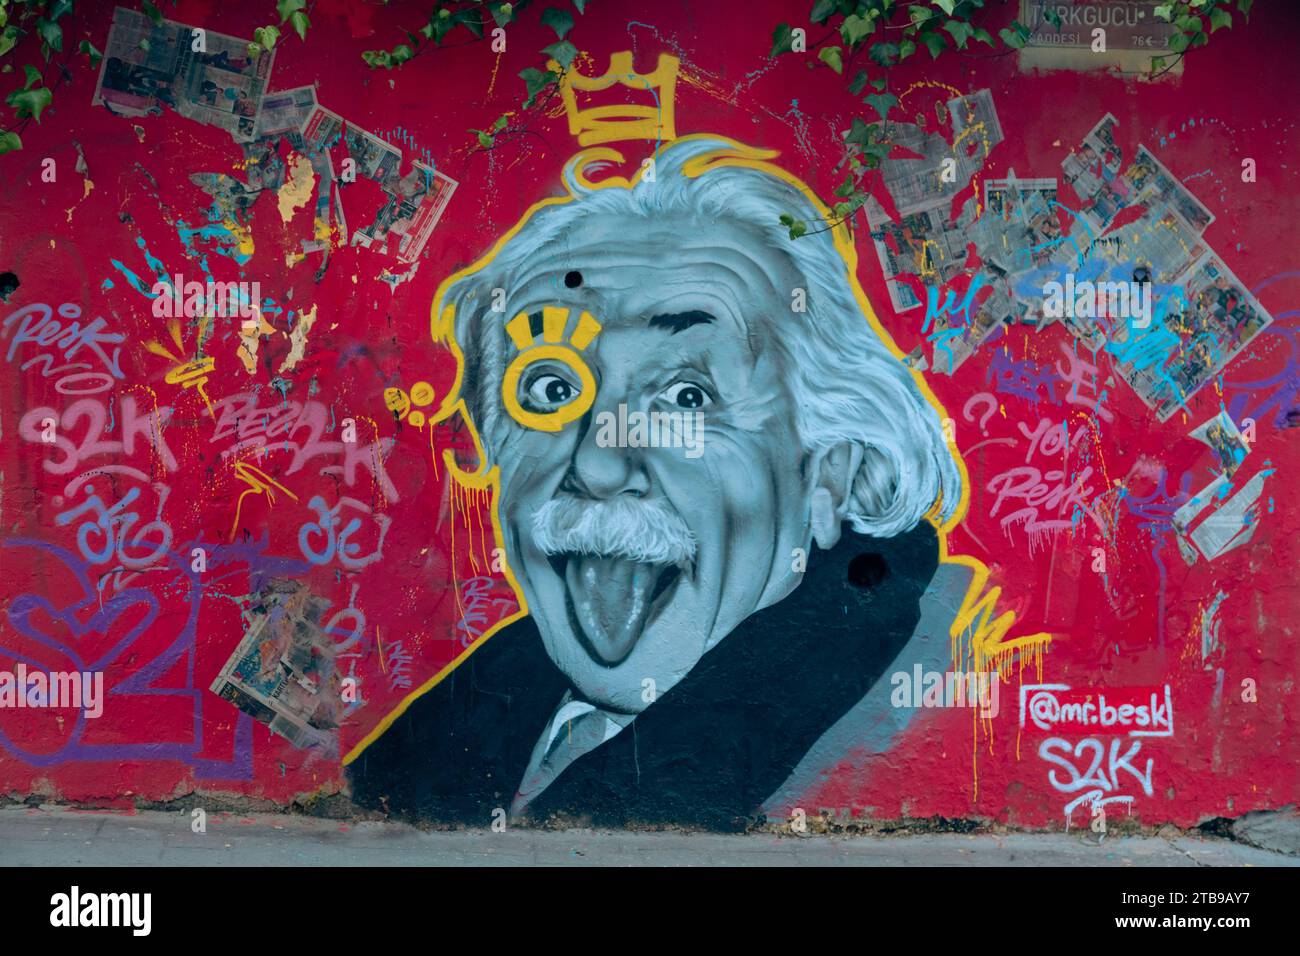 Istanbul, Turkey - December 17, 2018: Albert Einstein showing the tongue artwork on the wall Stock Photo